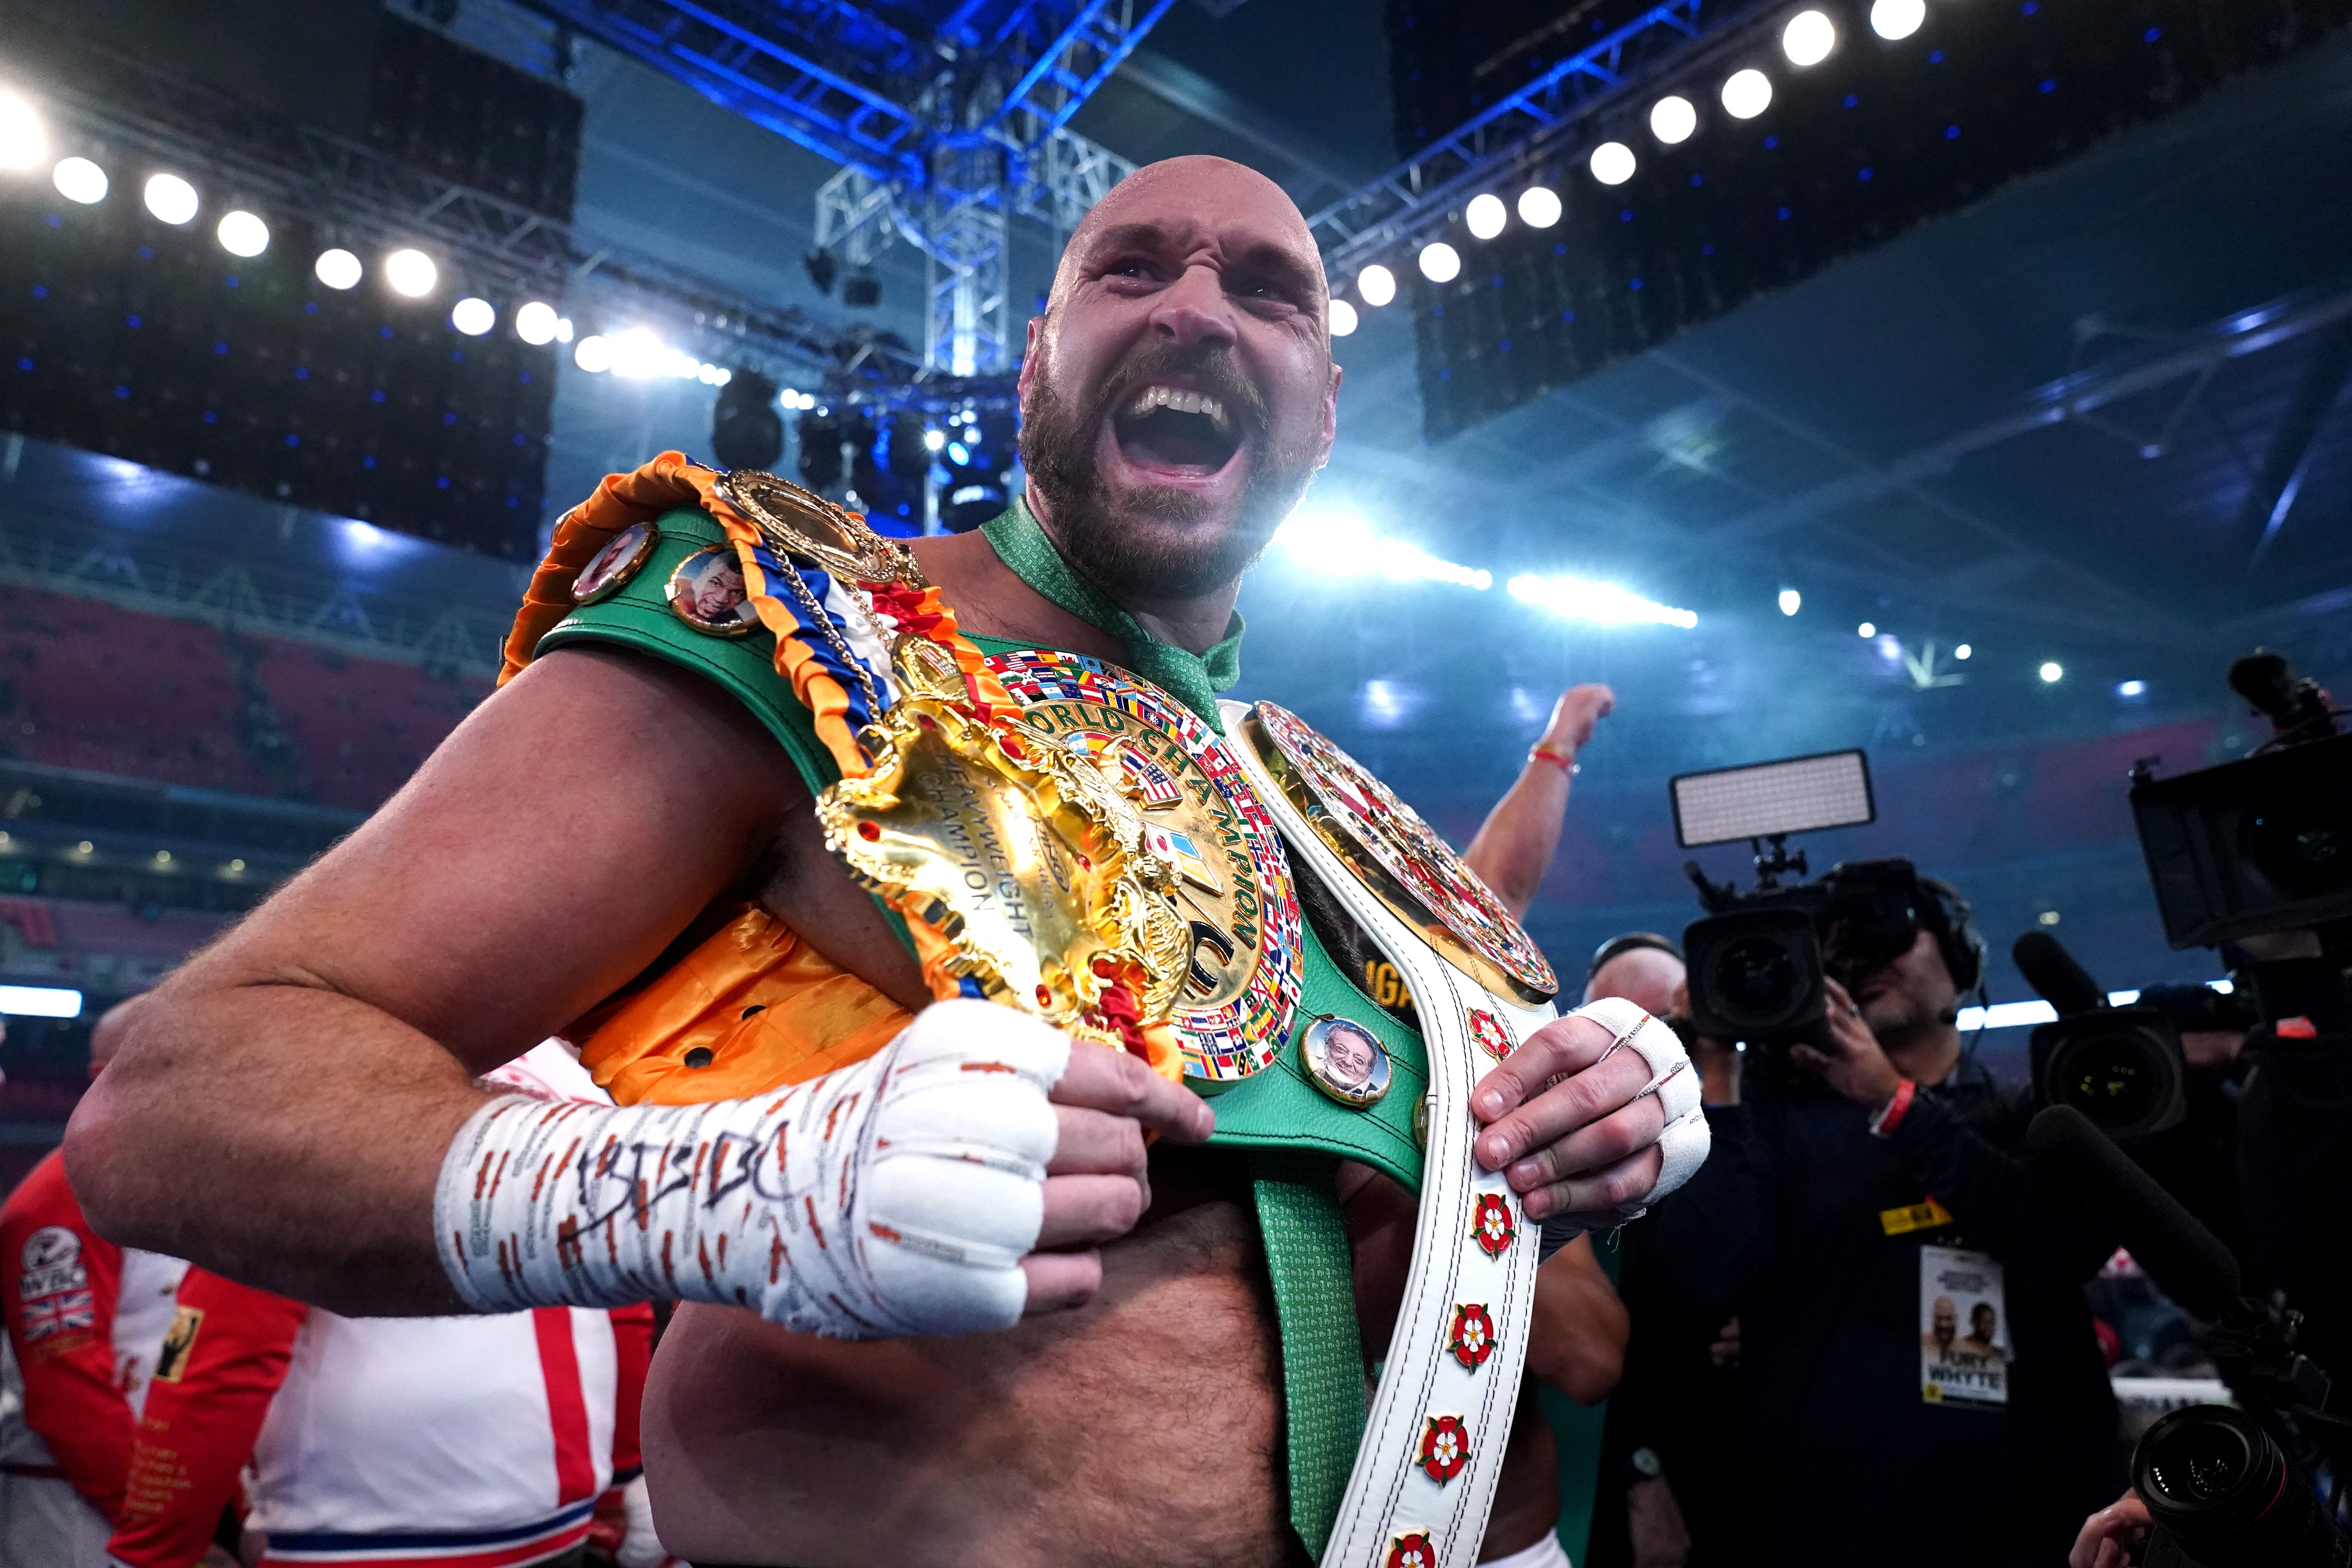 Tyson Fury announced his retirement after beating Dillian Whyte at Wembley last month